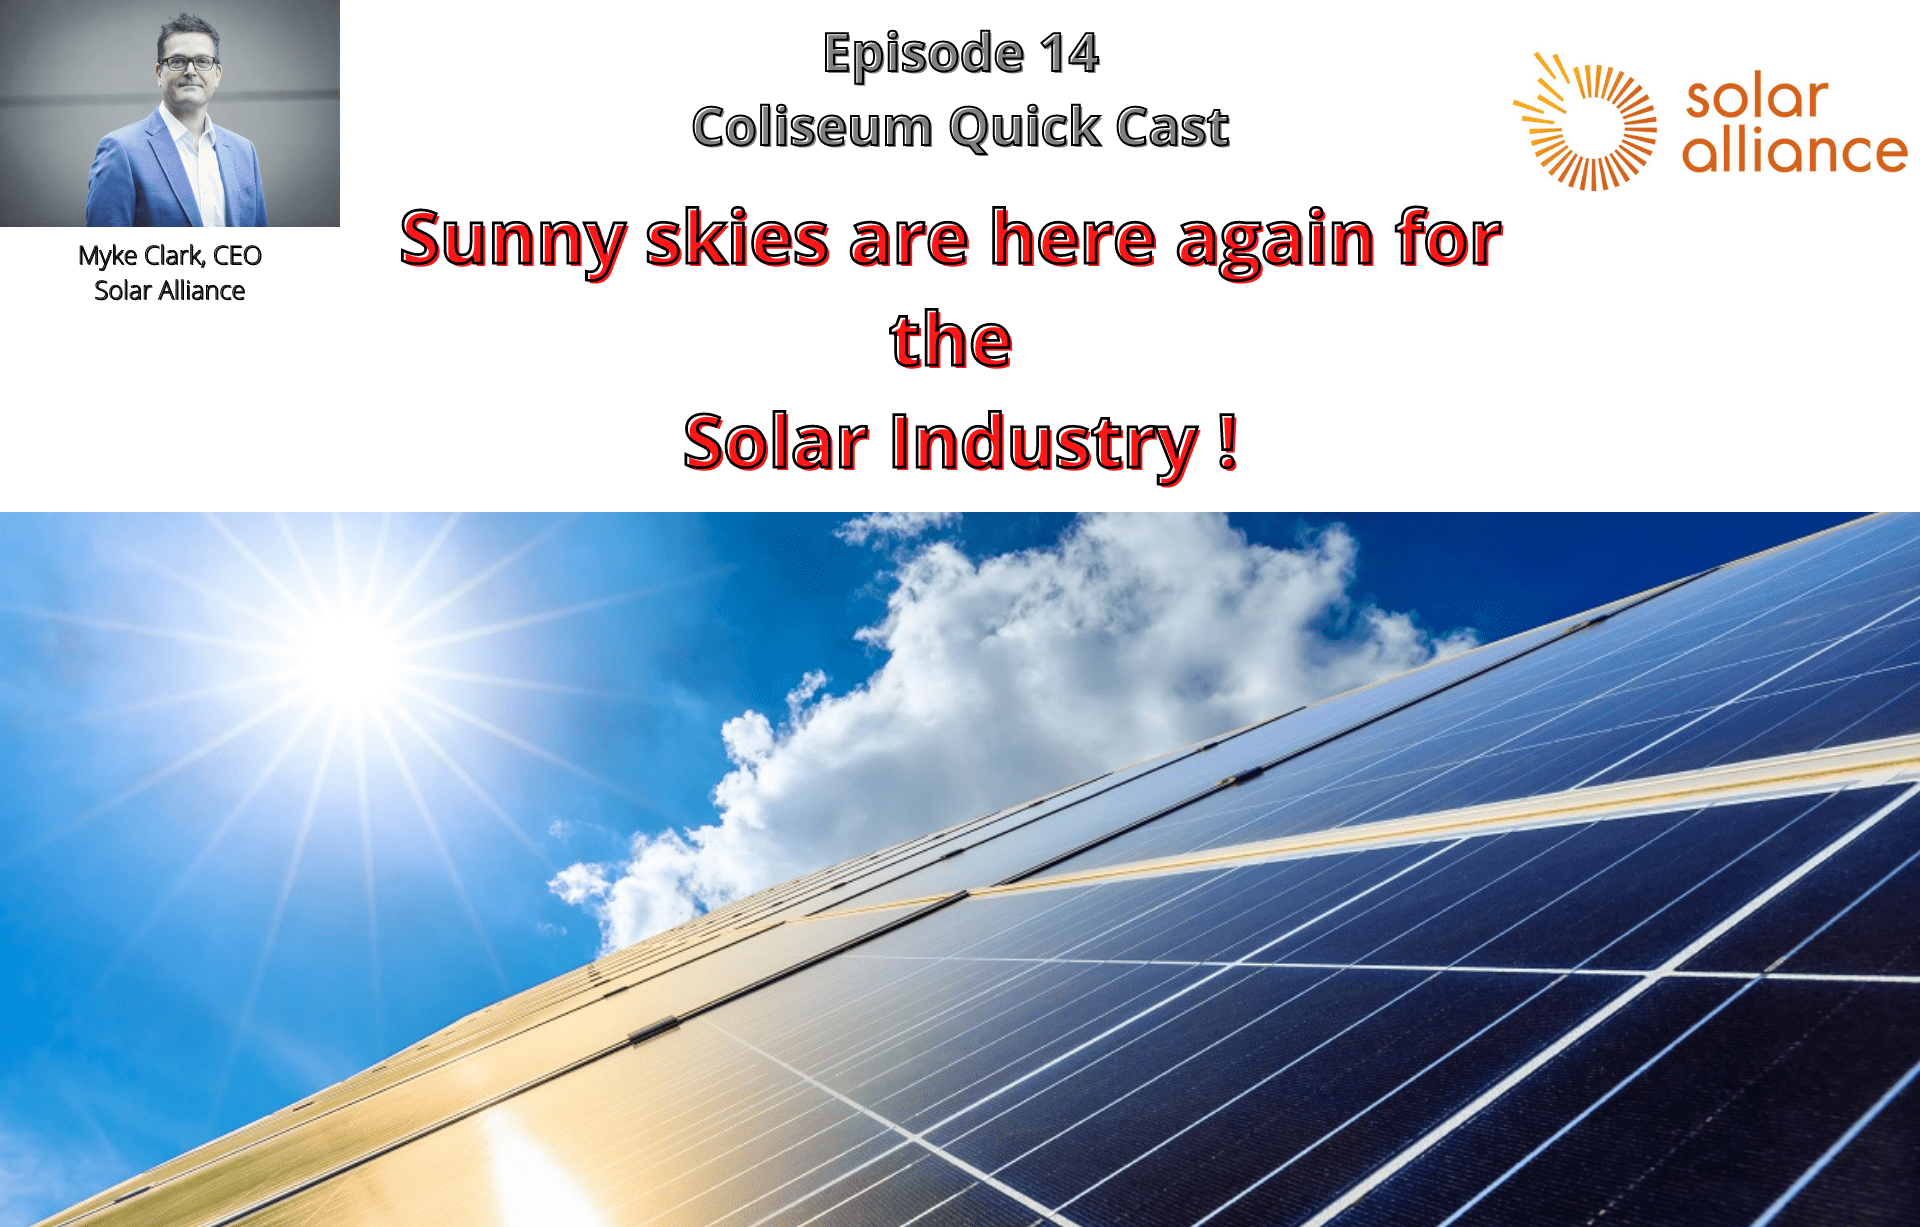 EP. 14: One-one-One Quick Cast with CEO Myke Clark of Solar Alliance Energy  &#8220;Sunny Skies ahead for the Solar Industry&#8221;!